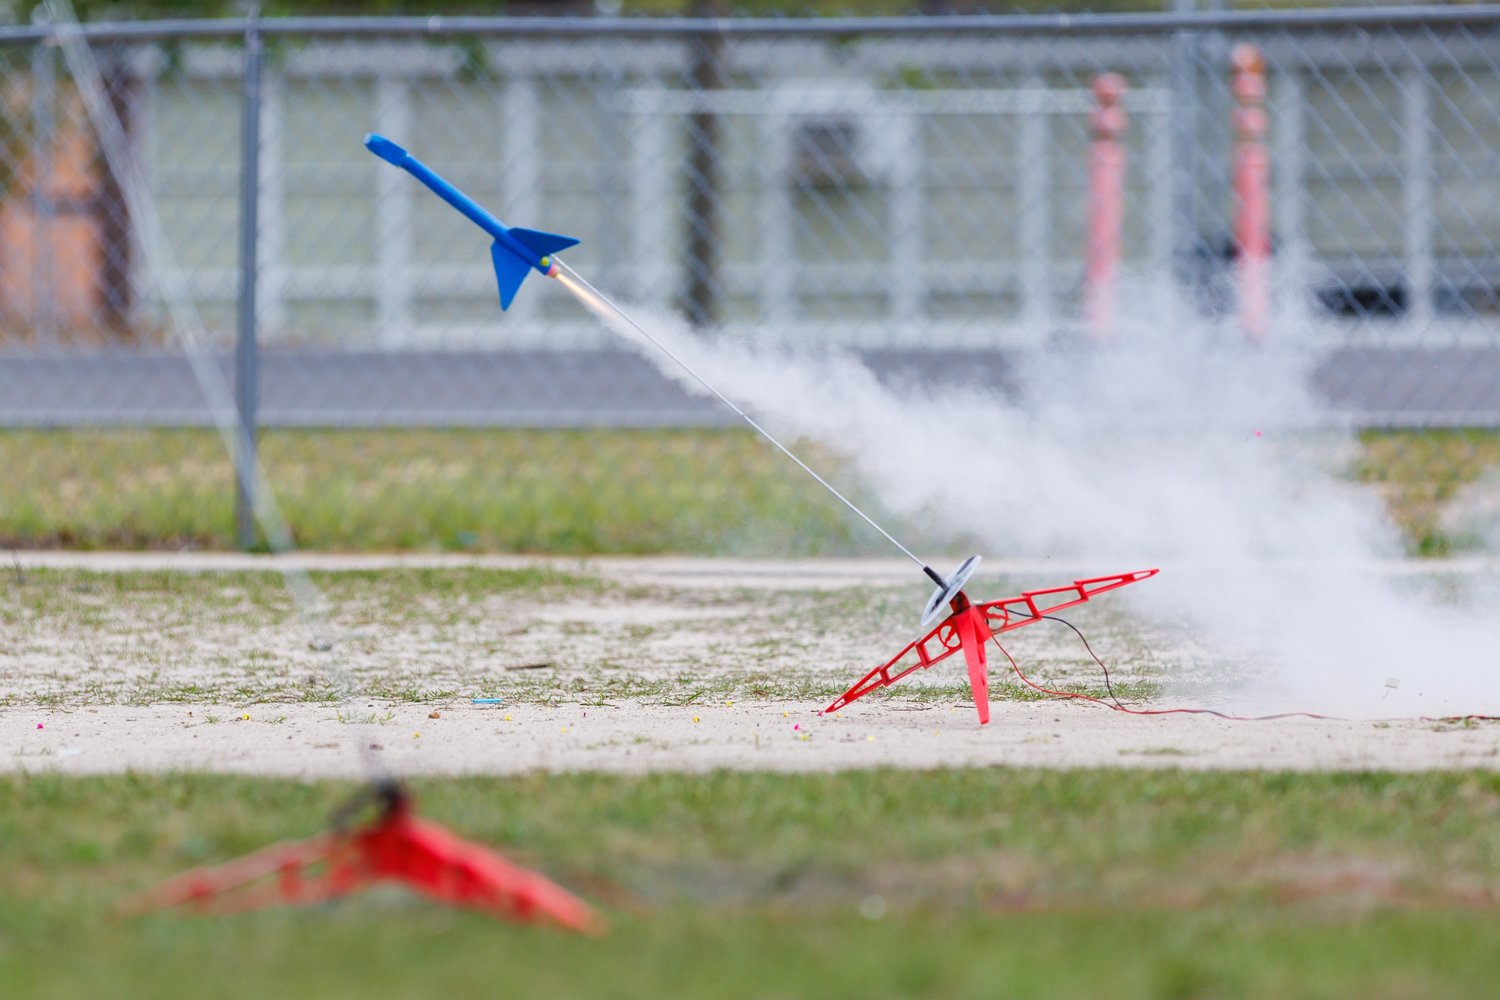 A rocket leaves a trail of smoke as it races toward the sky at the Seventy-First Classical Middle School STEM exercise on Wednesday.